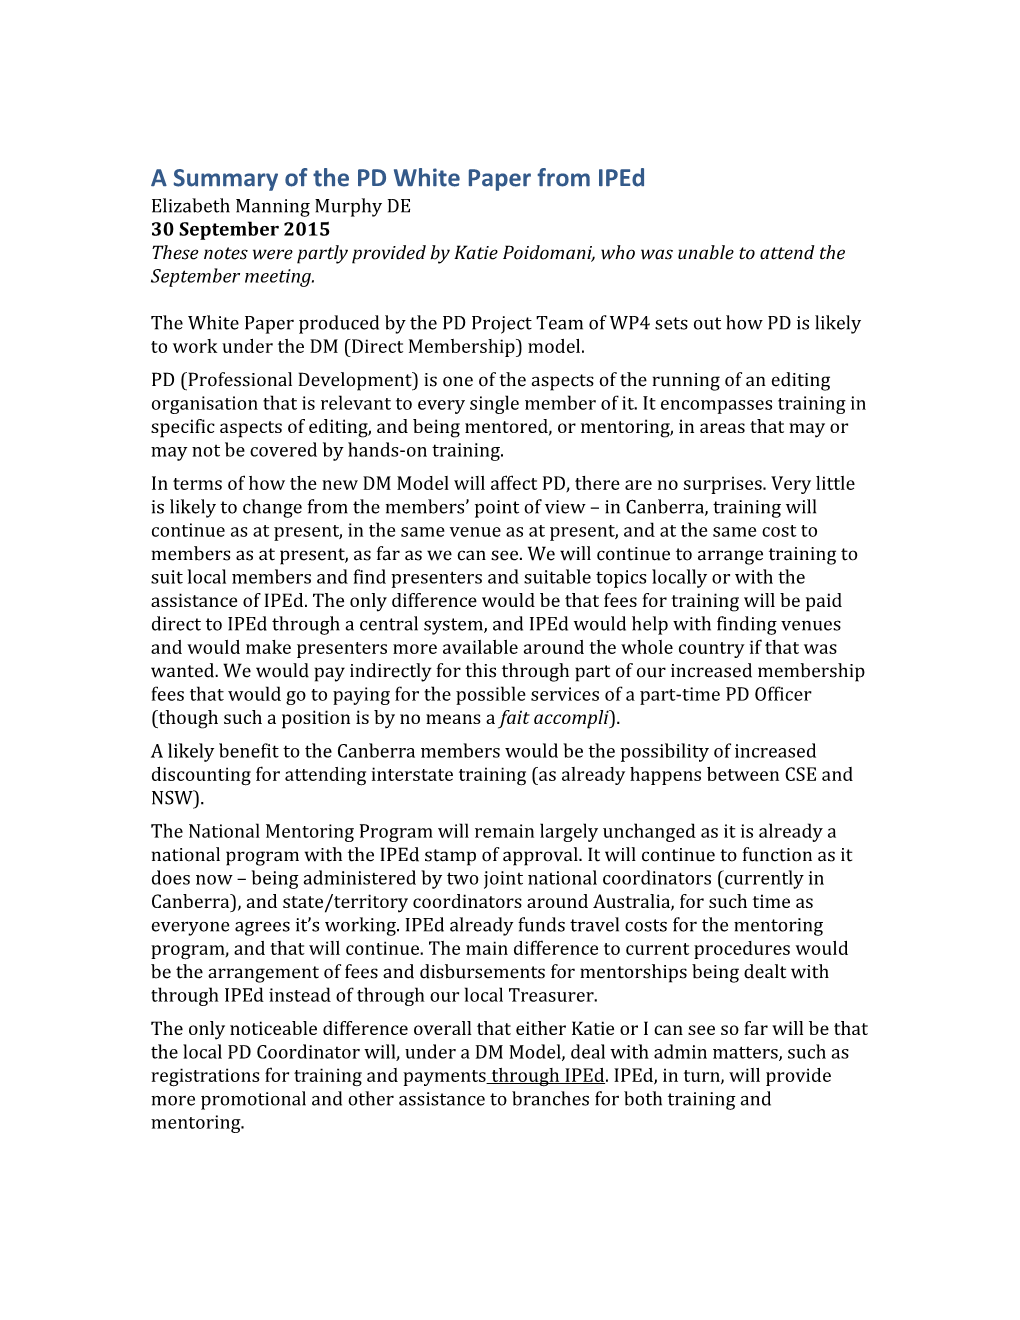 A Summary of the PD White Paper from Iped